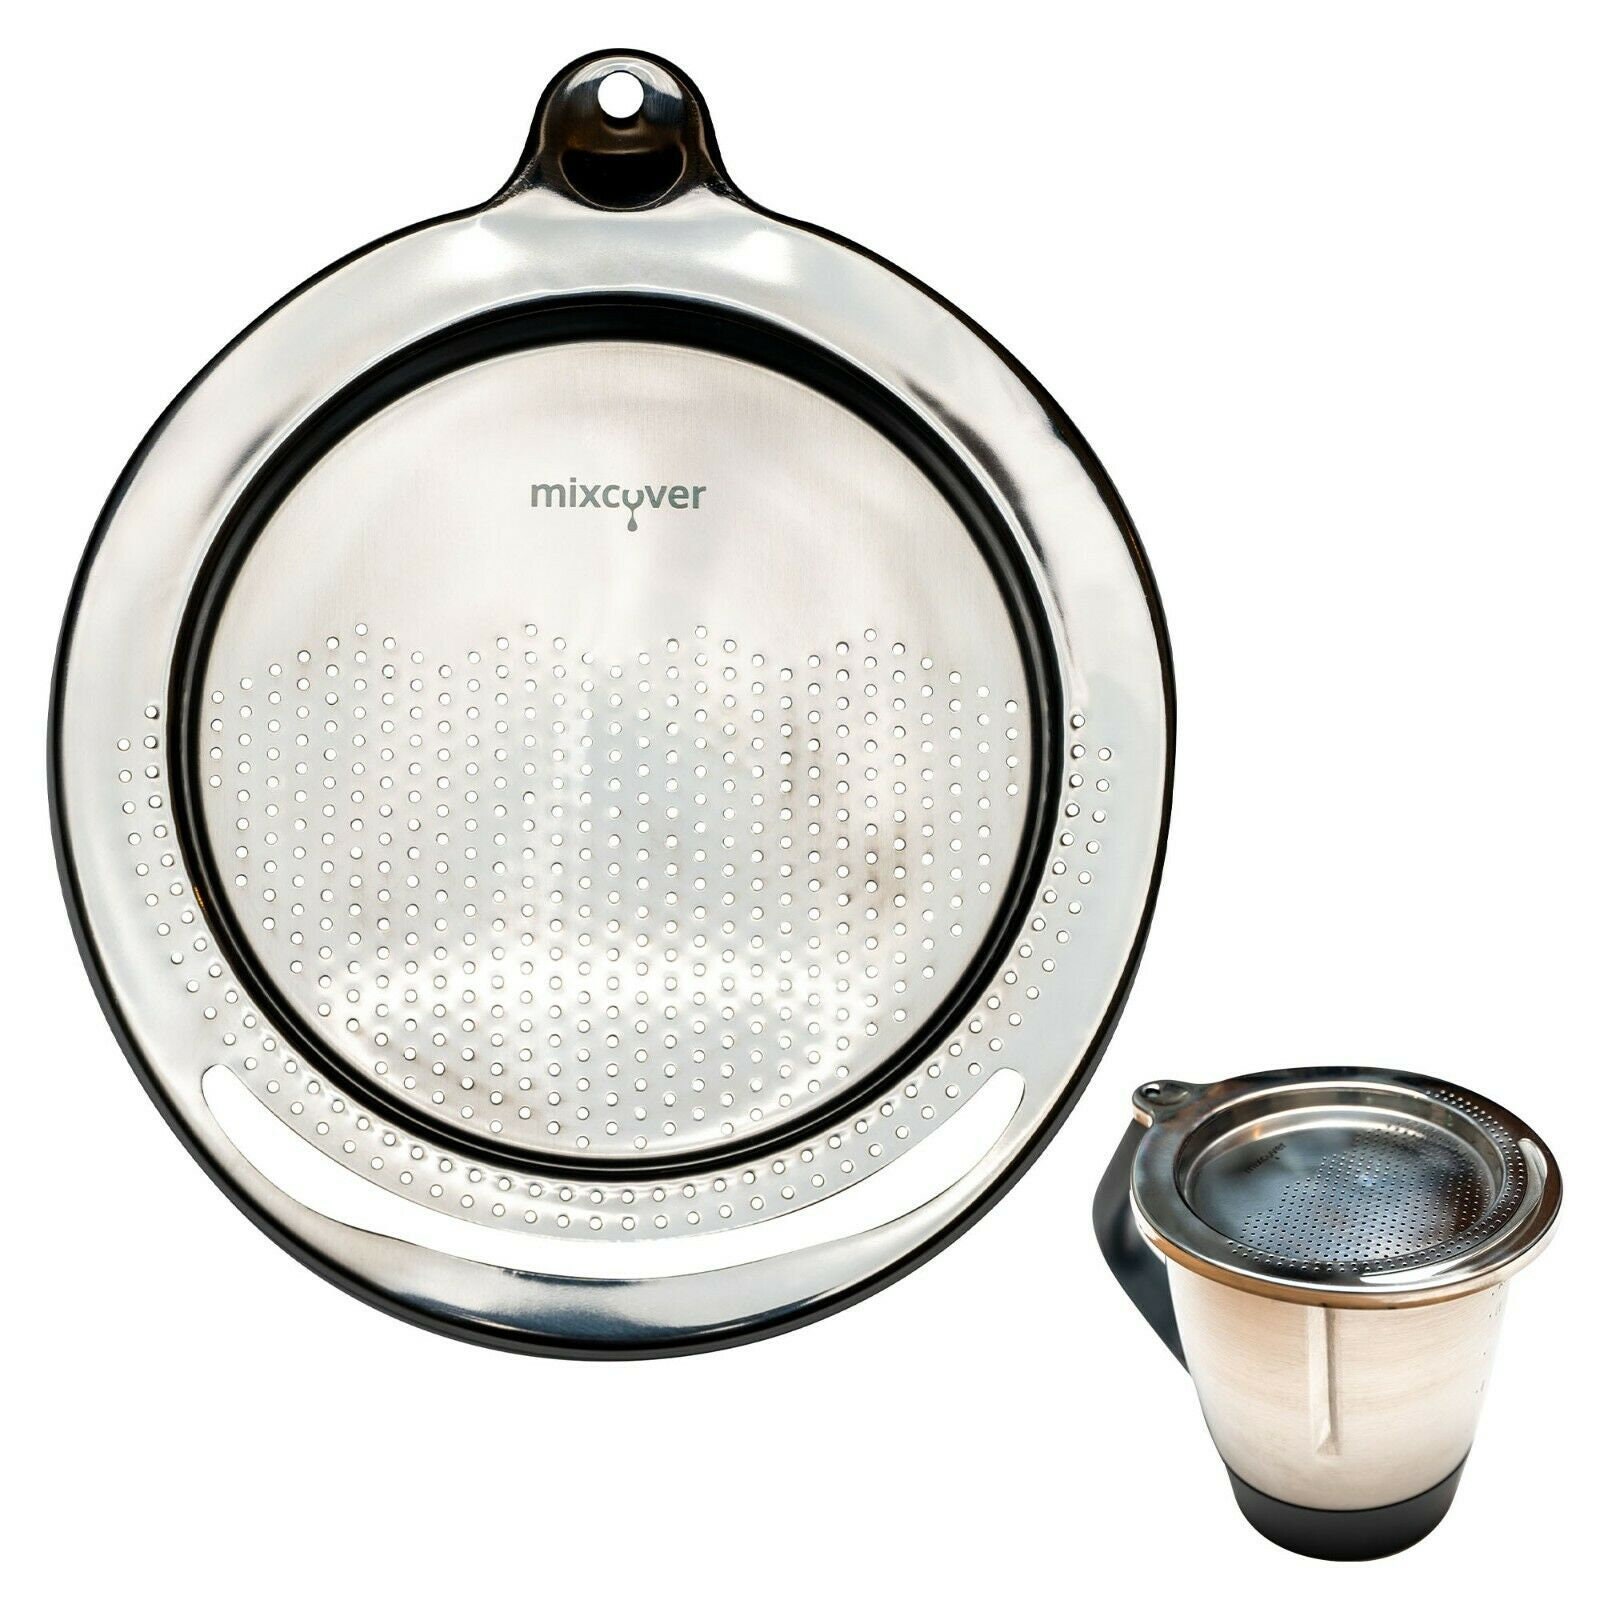 B-stock: Mixcover Stainless Steel Sieve Pouring Aid Thermomix TM6 and TM5,  Noodles and Much More. Pour Off 